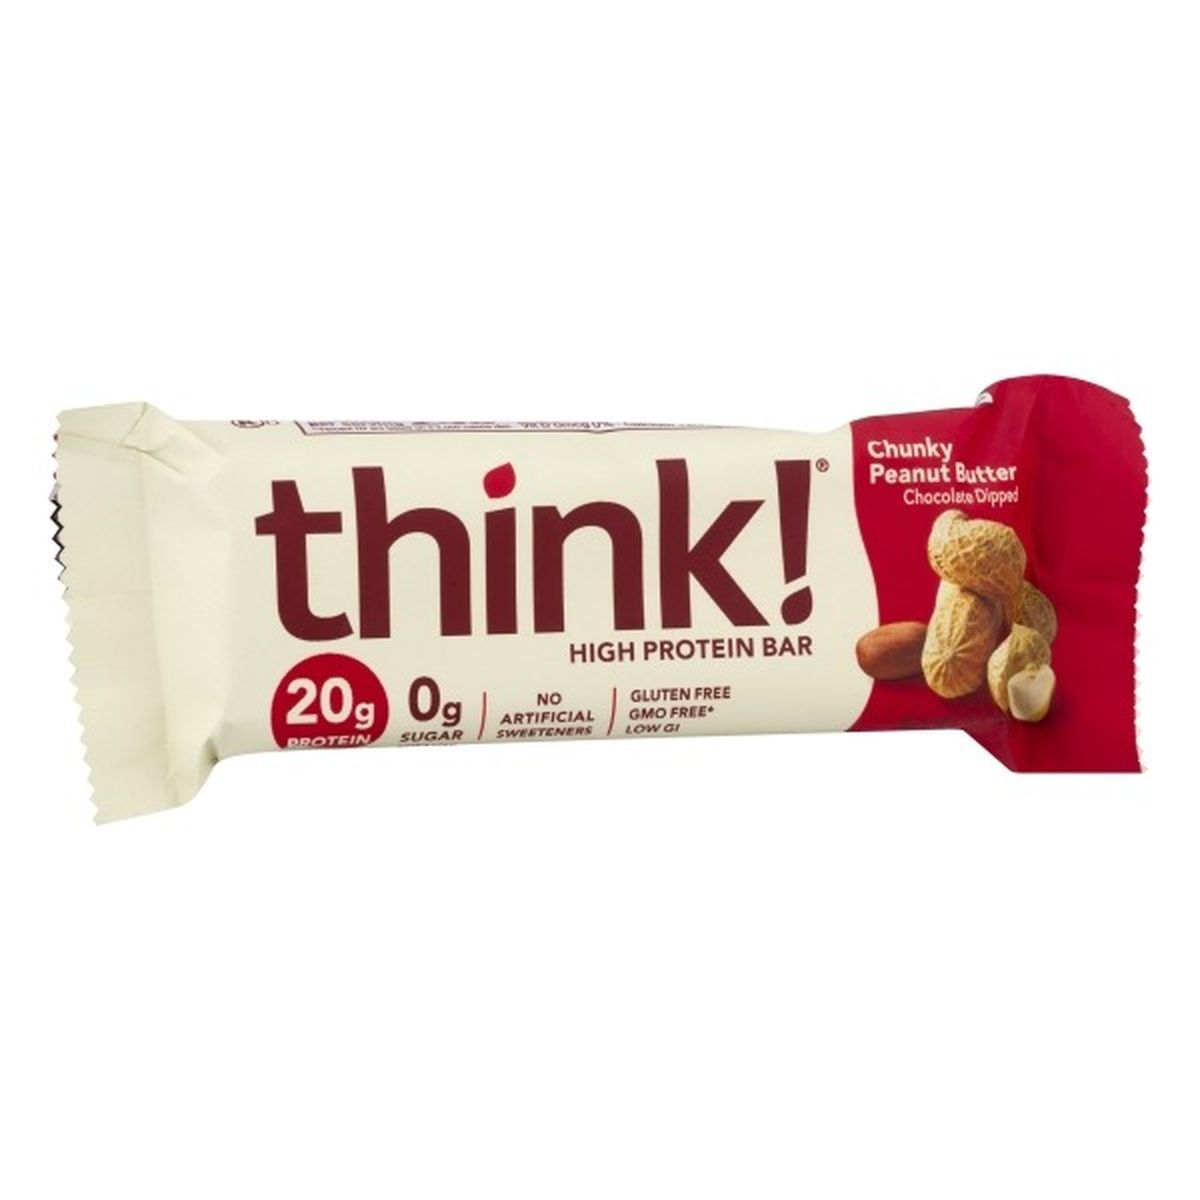 Calories in Think! High Protein Bar, Chocolate Dipped, Chunky Peanut Butter